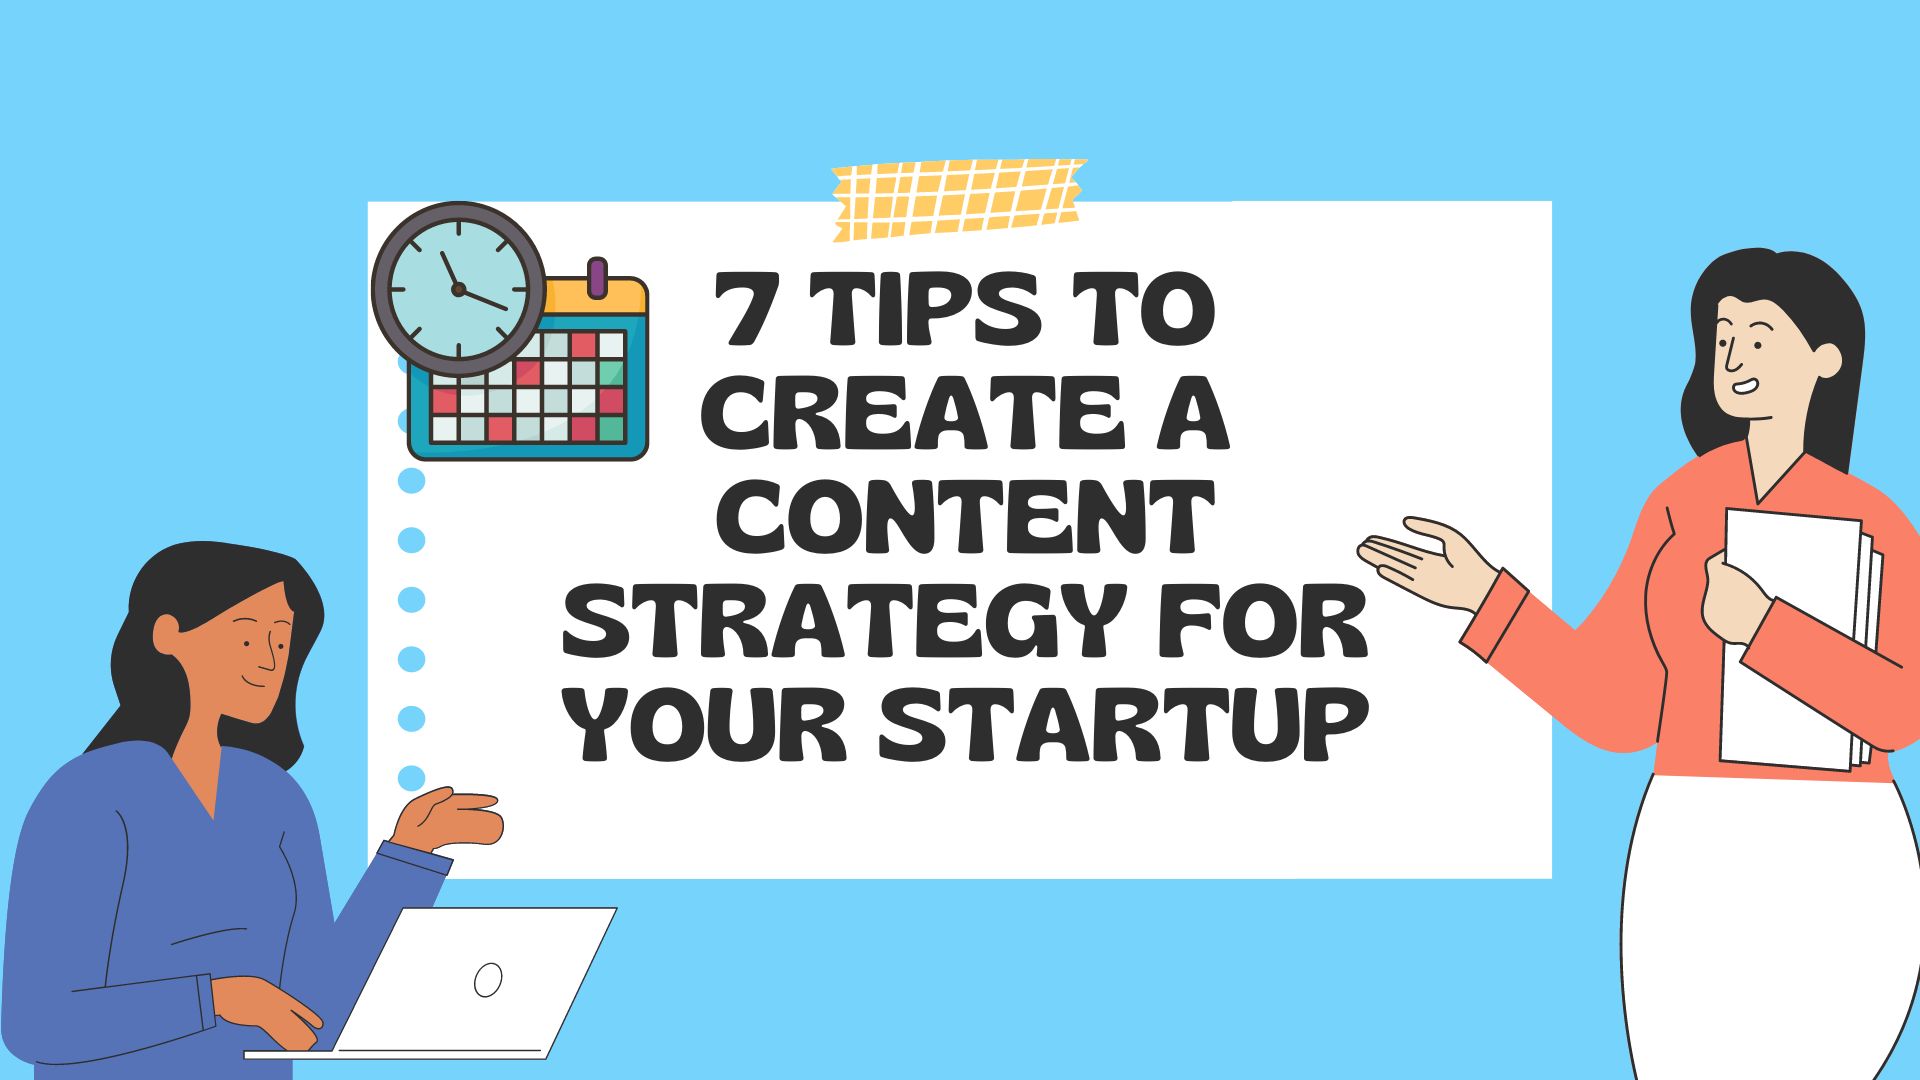 7-Tips-To-Create-a-Content-Strategy-for-your-startup